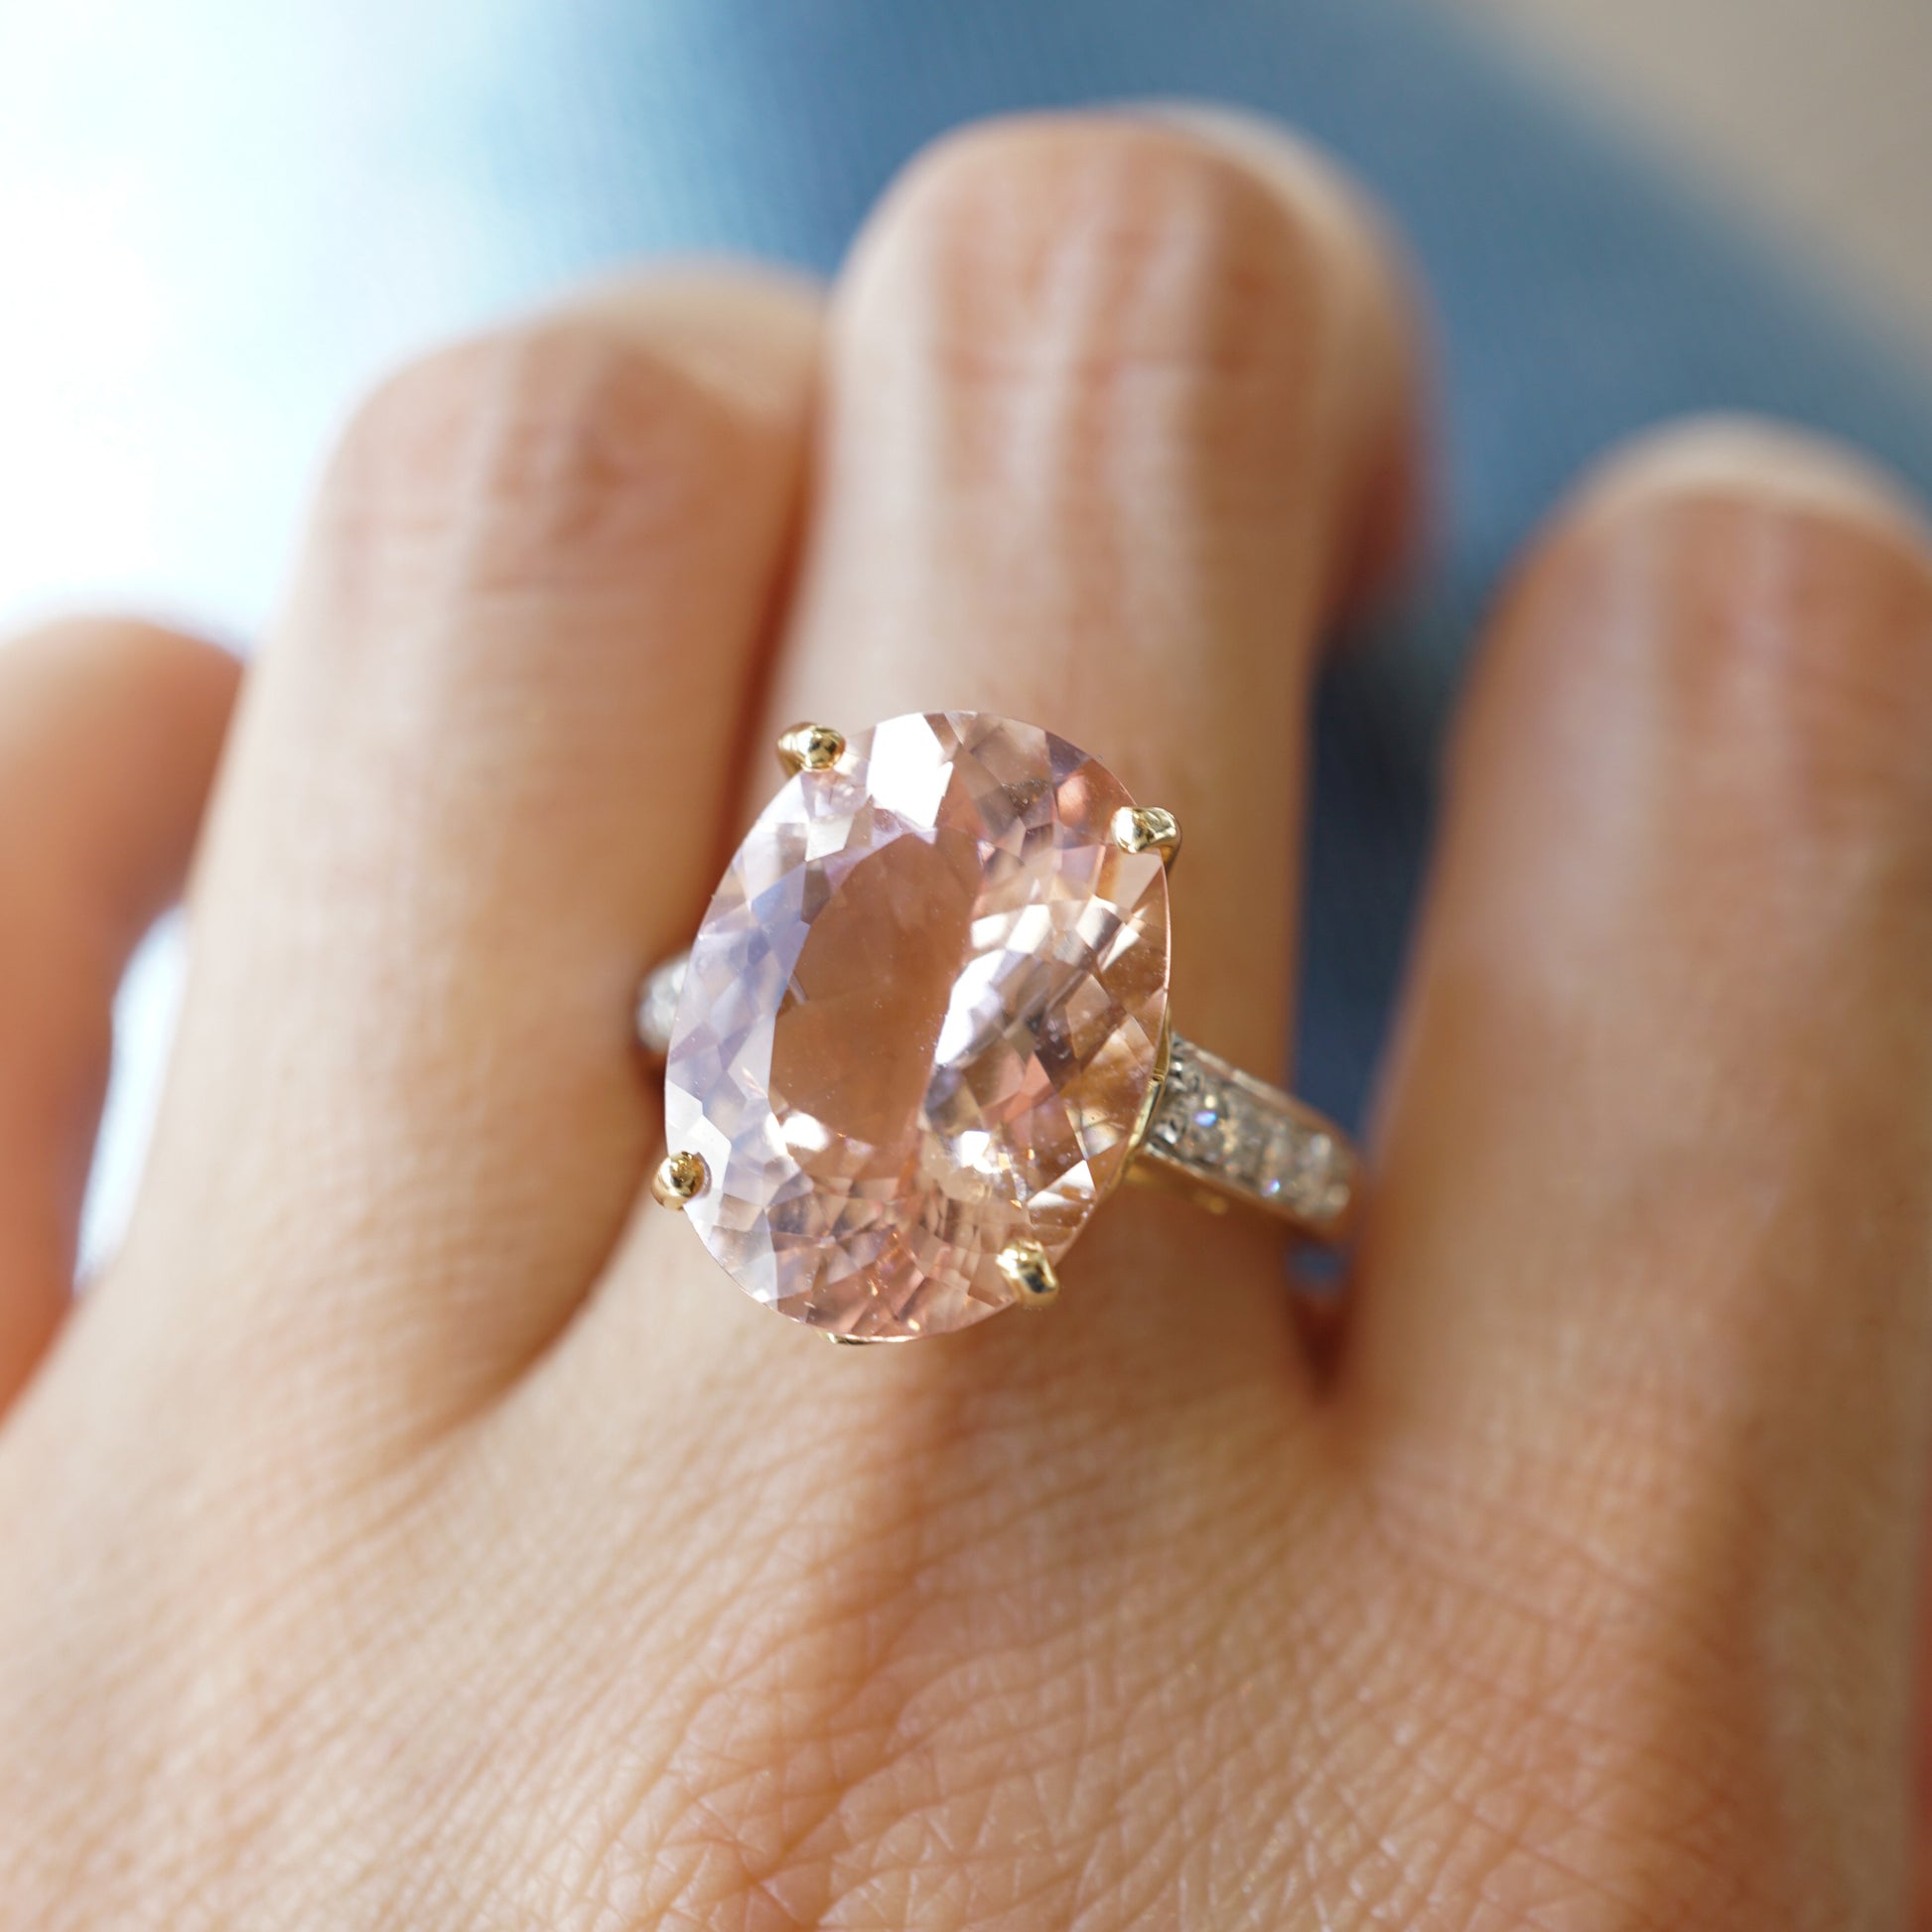 7.50 Oval Pink Morganite and Diamond Ring in 14k Yellow Gold and Platinum